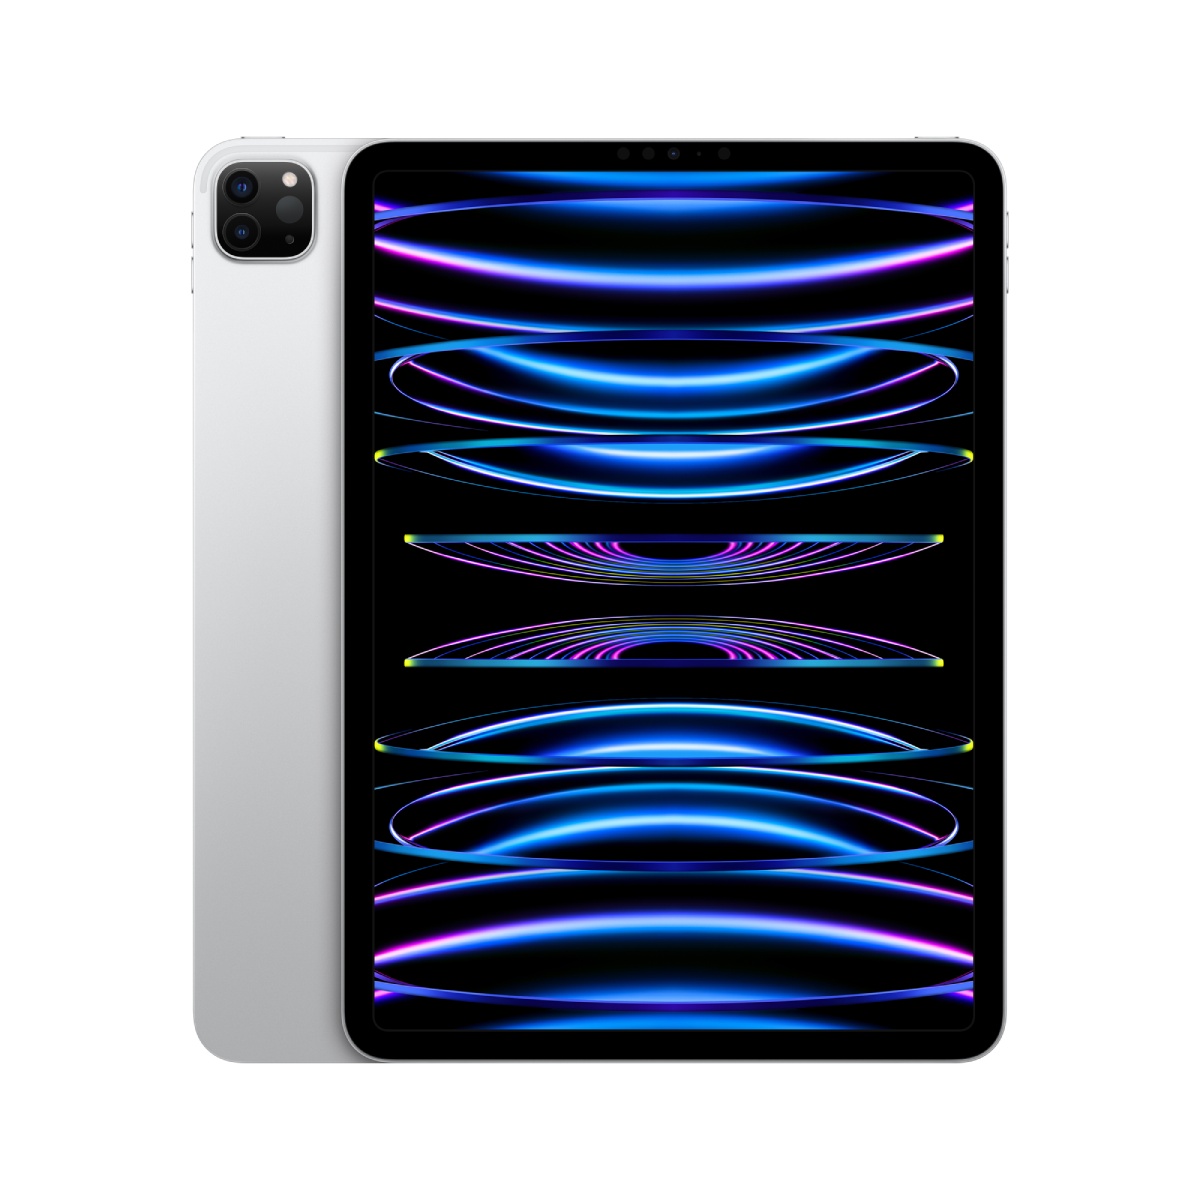 11-inch iPad Pro (4th Gen) Wi-Fi, , large image number 1